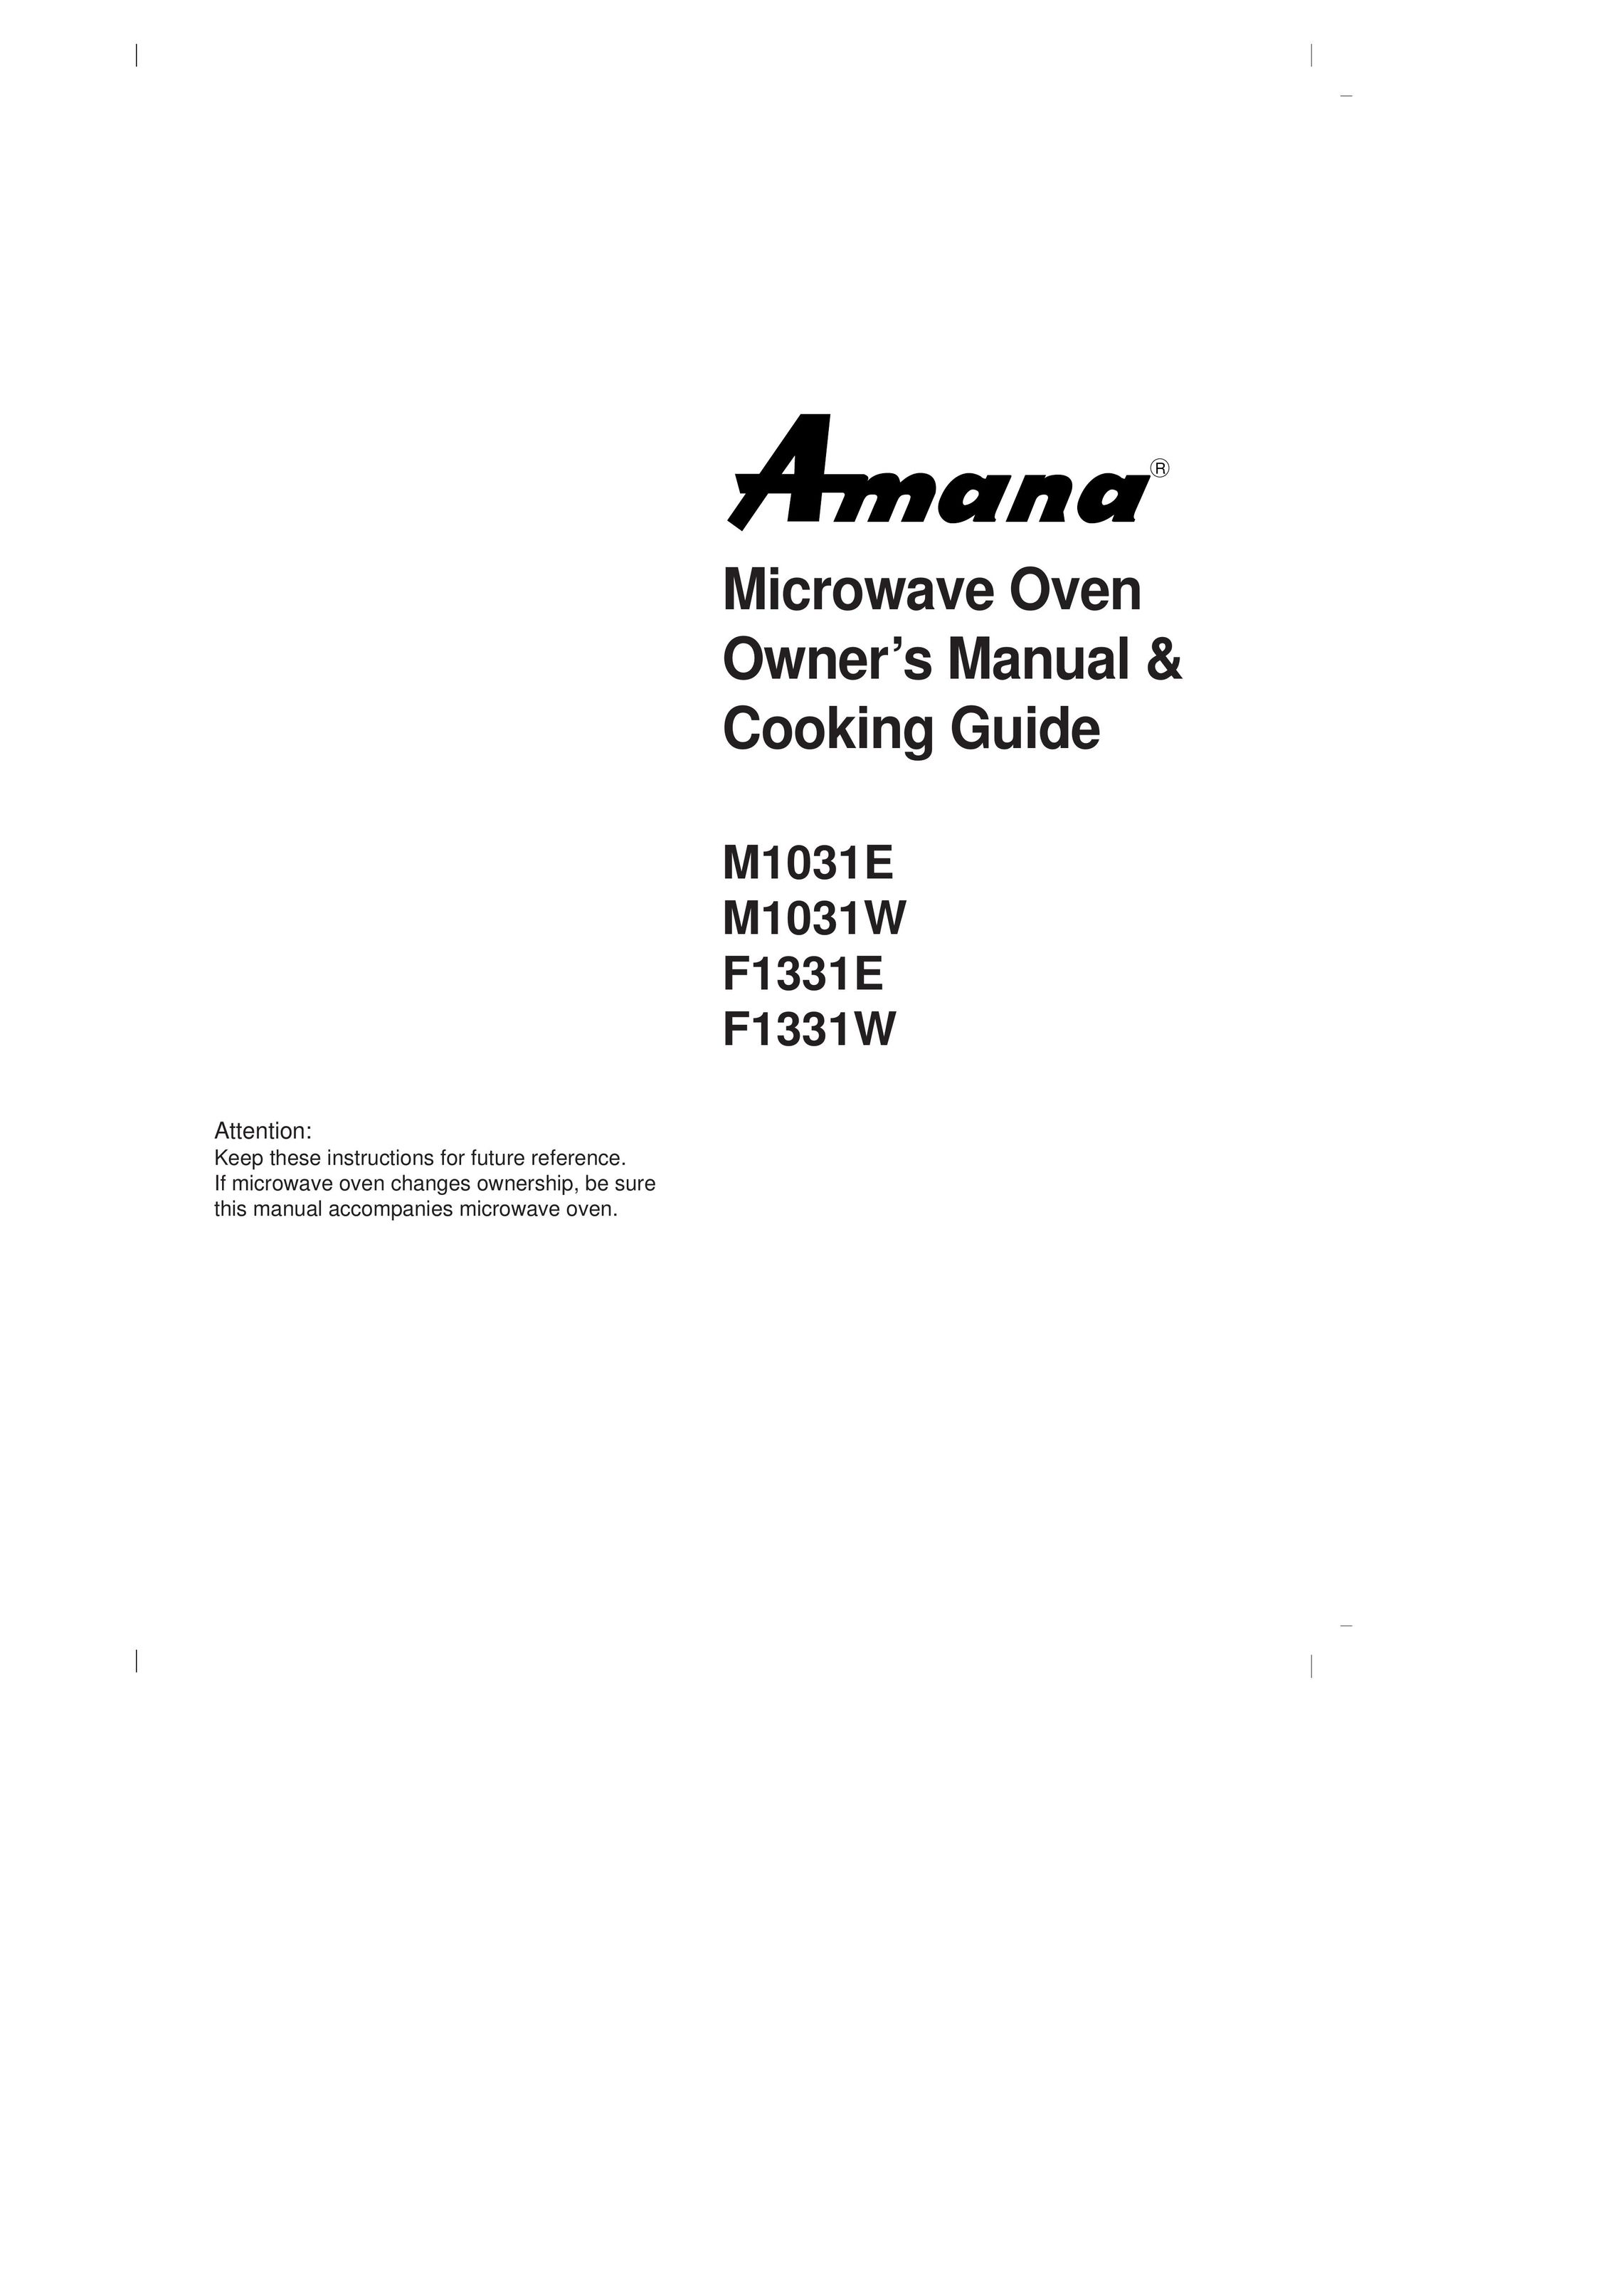 Amana F1331W Microwave Oven User Manual